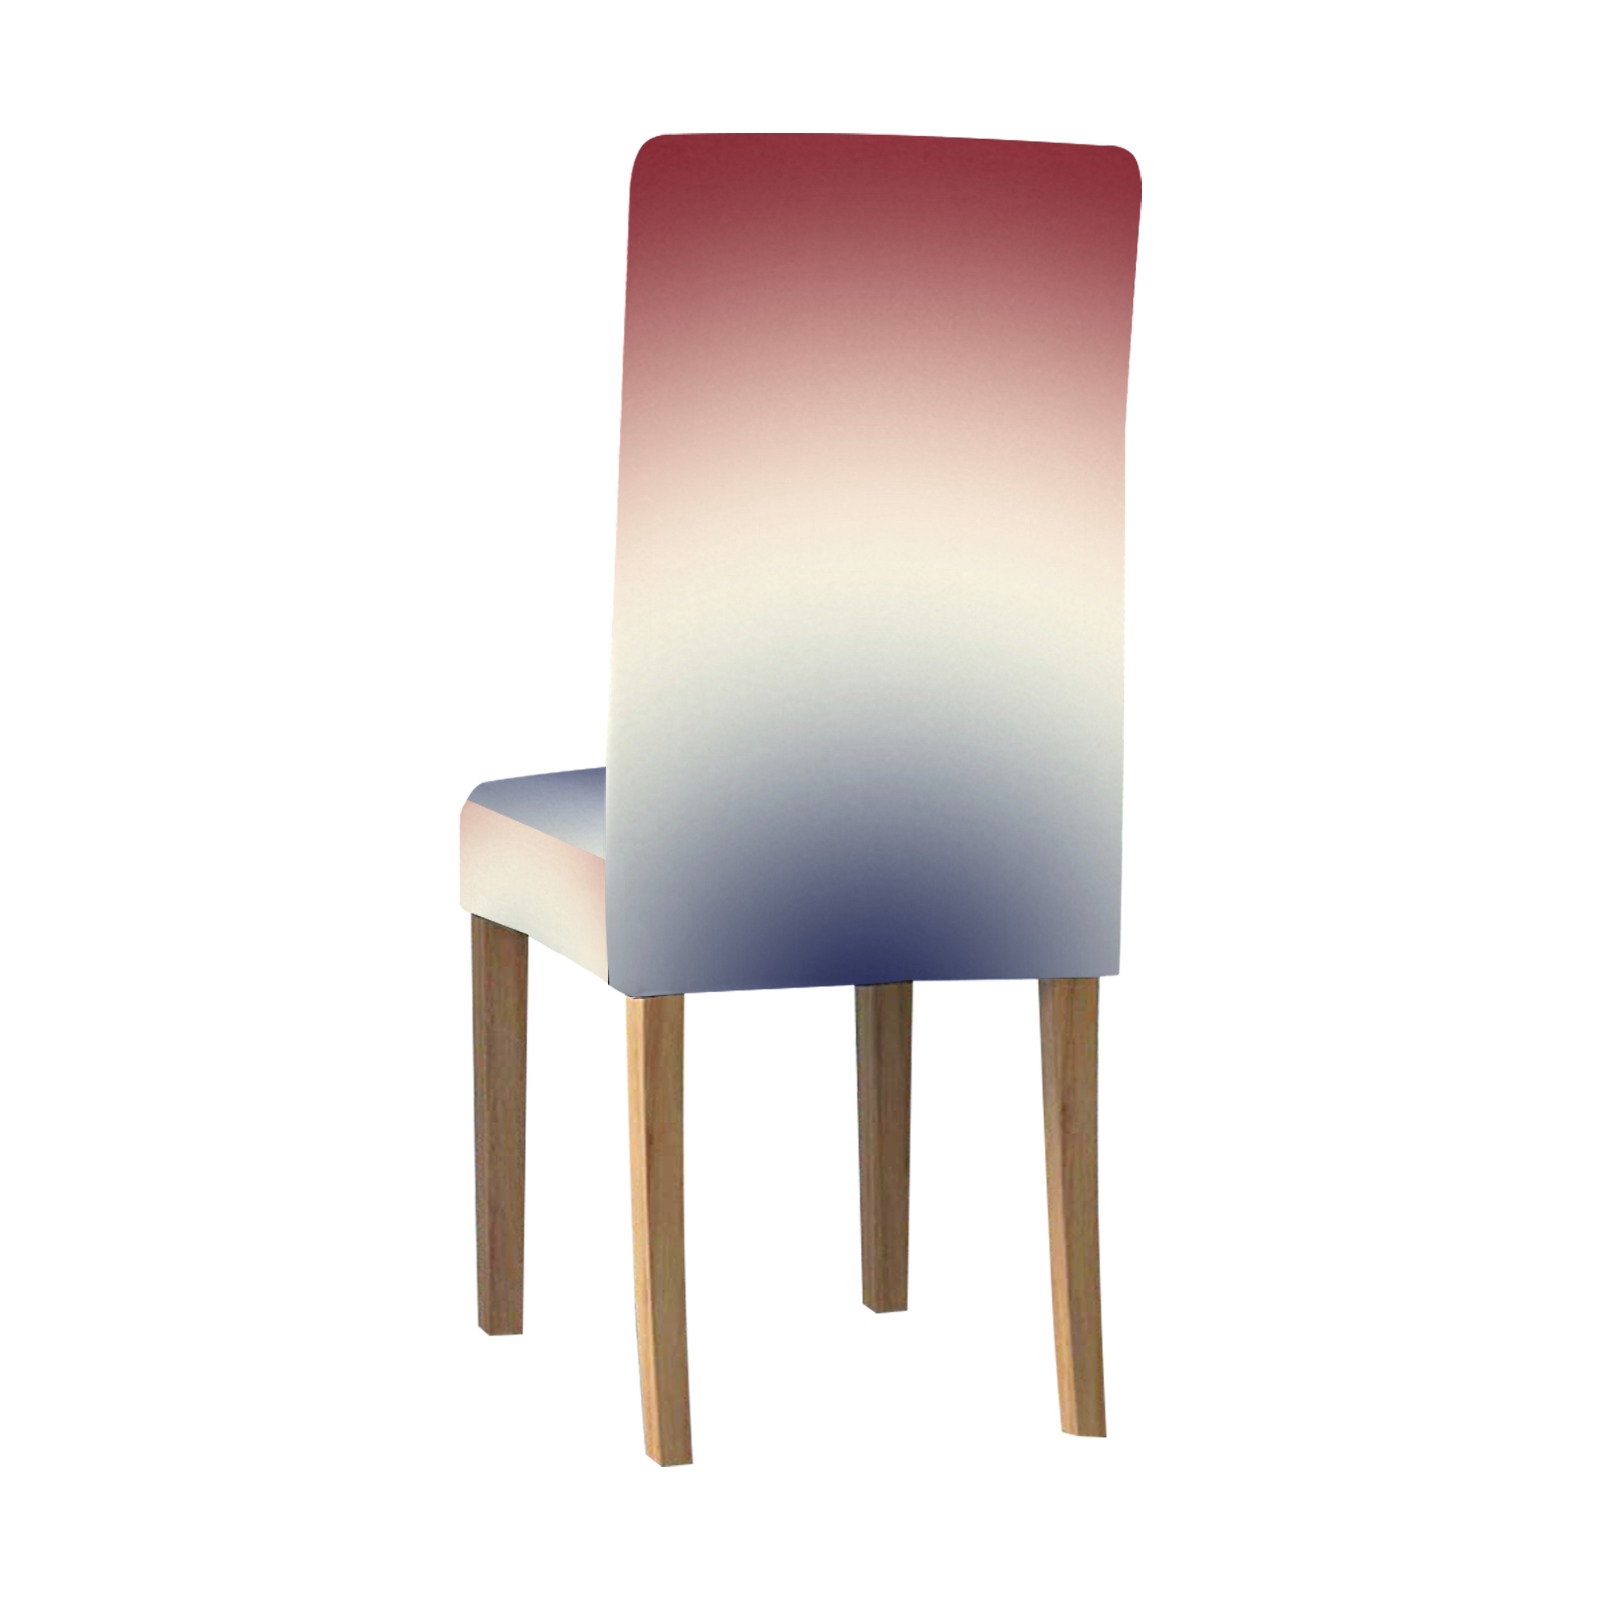 Radical Red White Blue Chair Cover (Pack of 4)